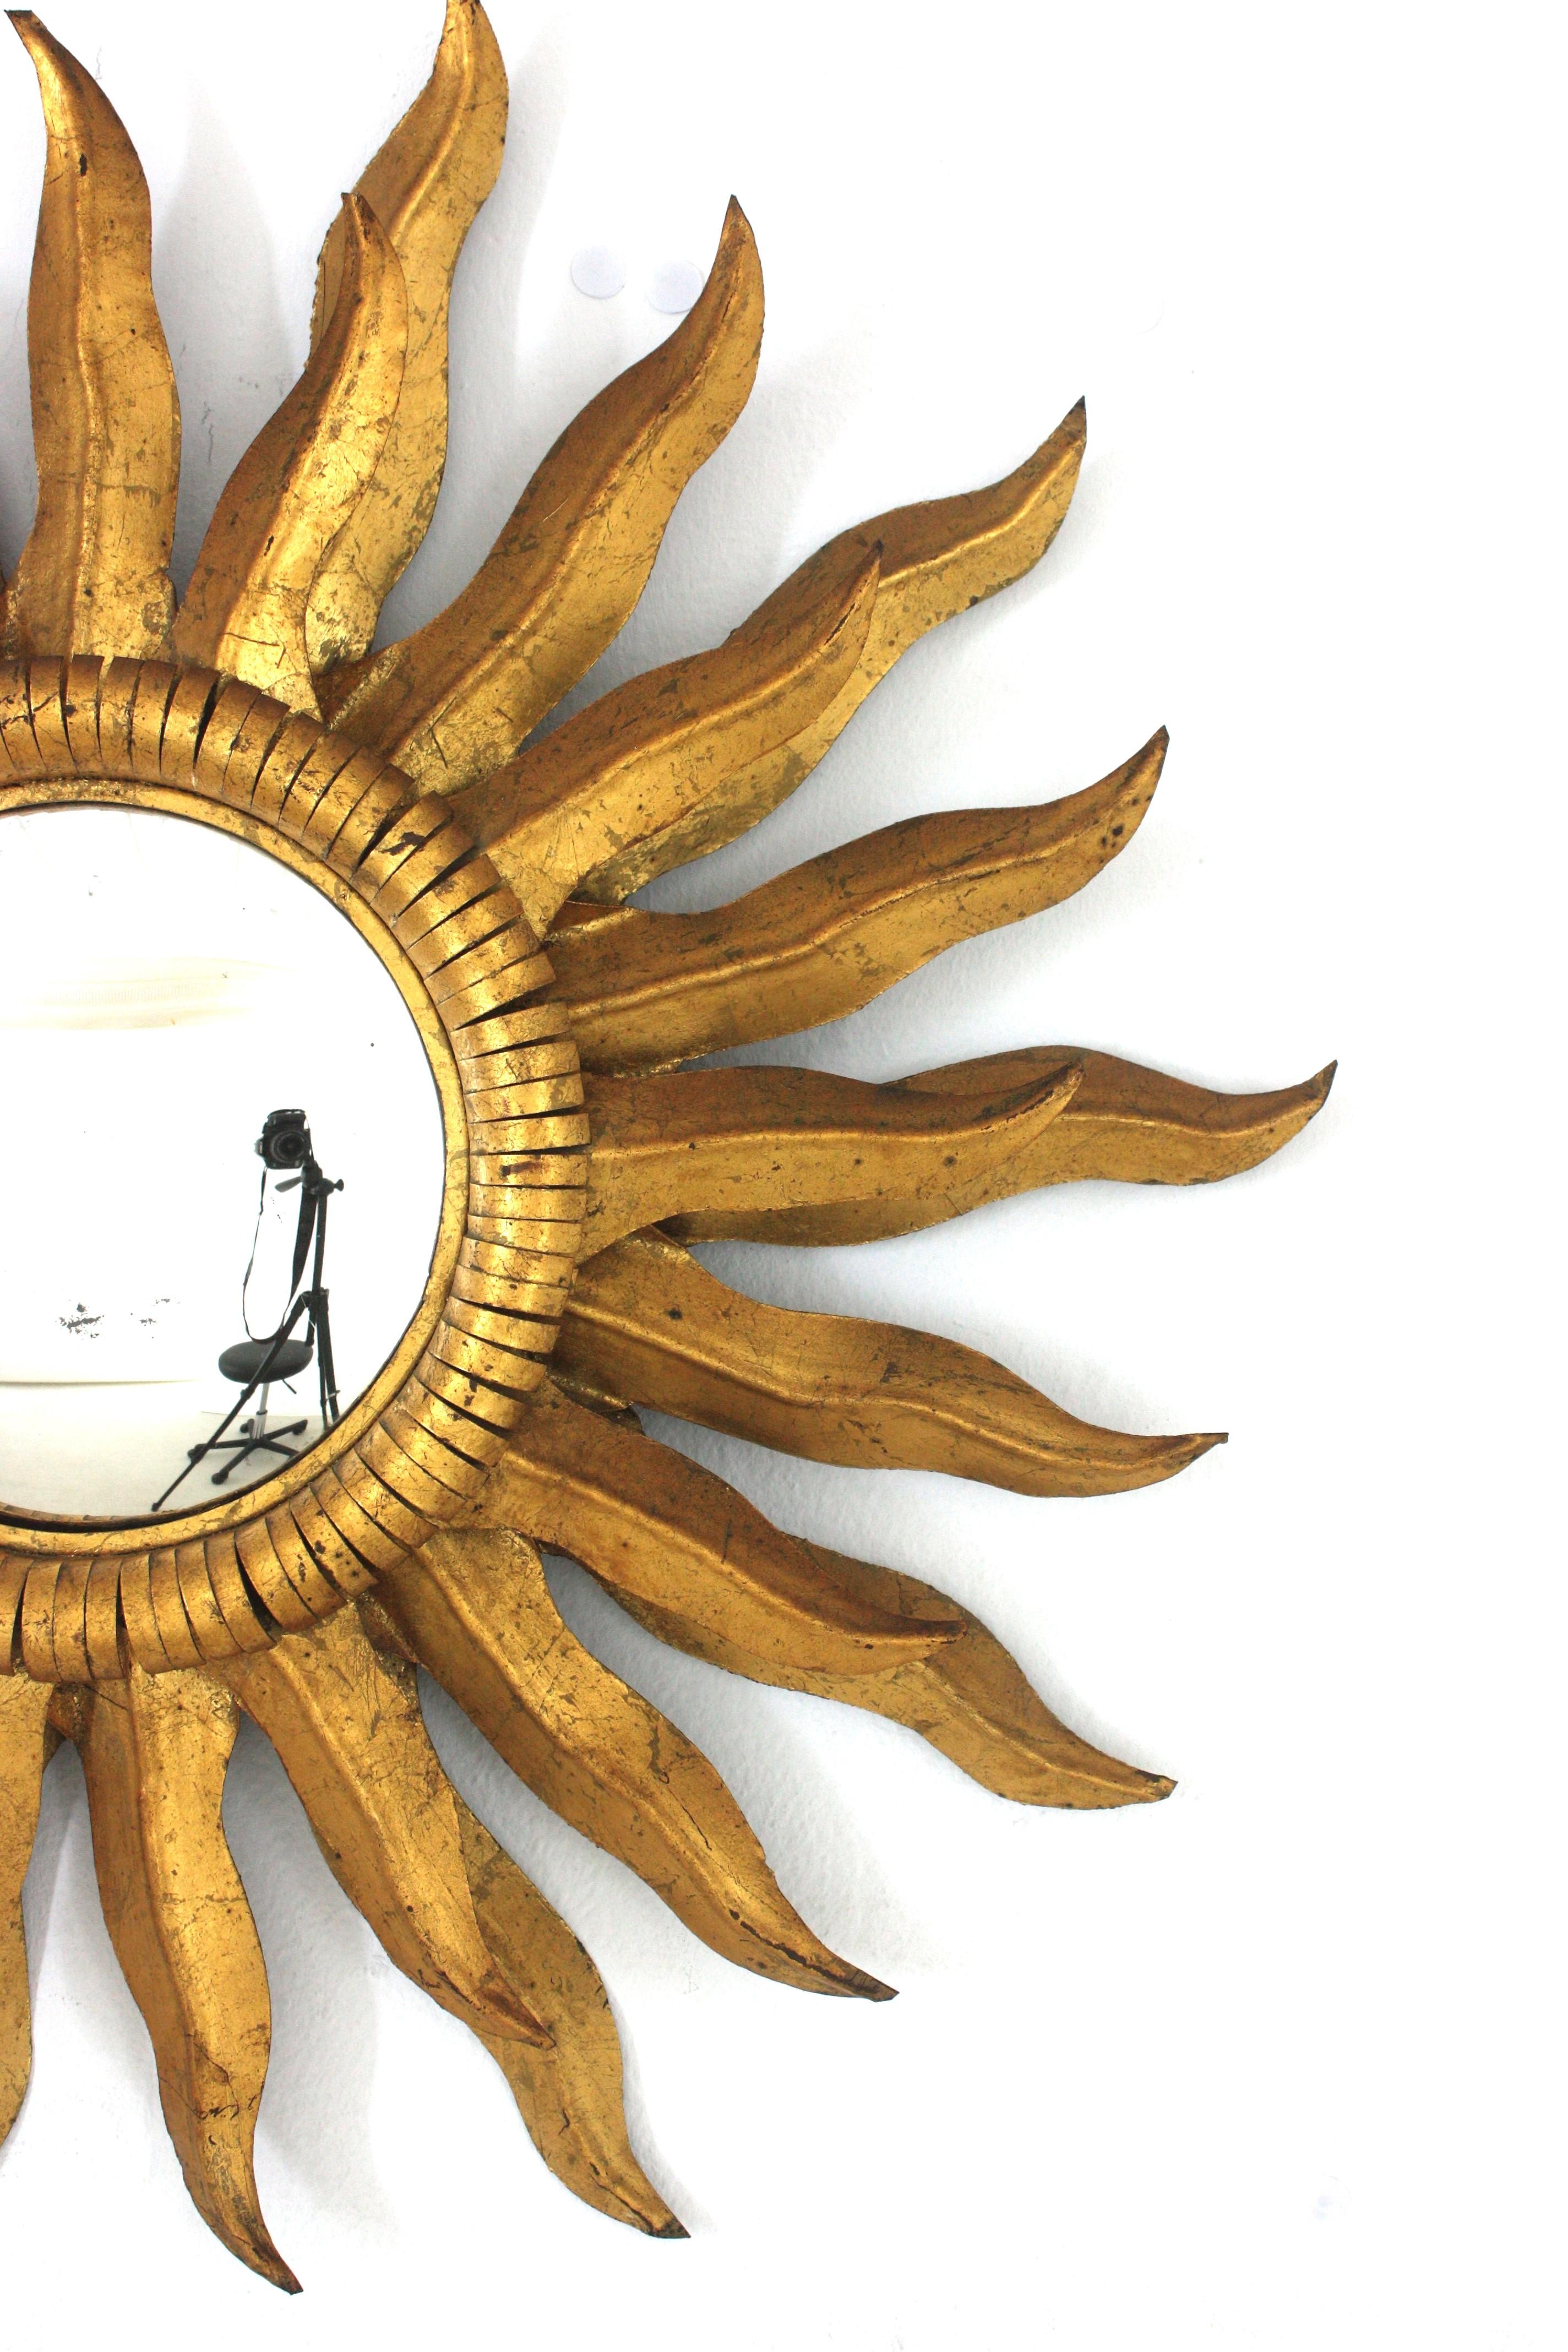 Spanish Double Layered Convex Sunburst Mirror in Gilt Metal, 1950s For Sale 3